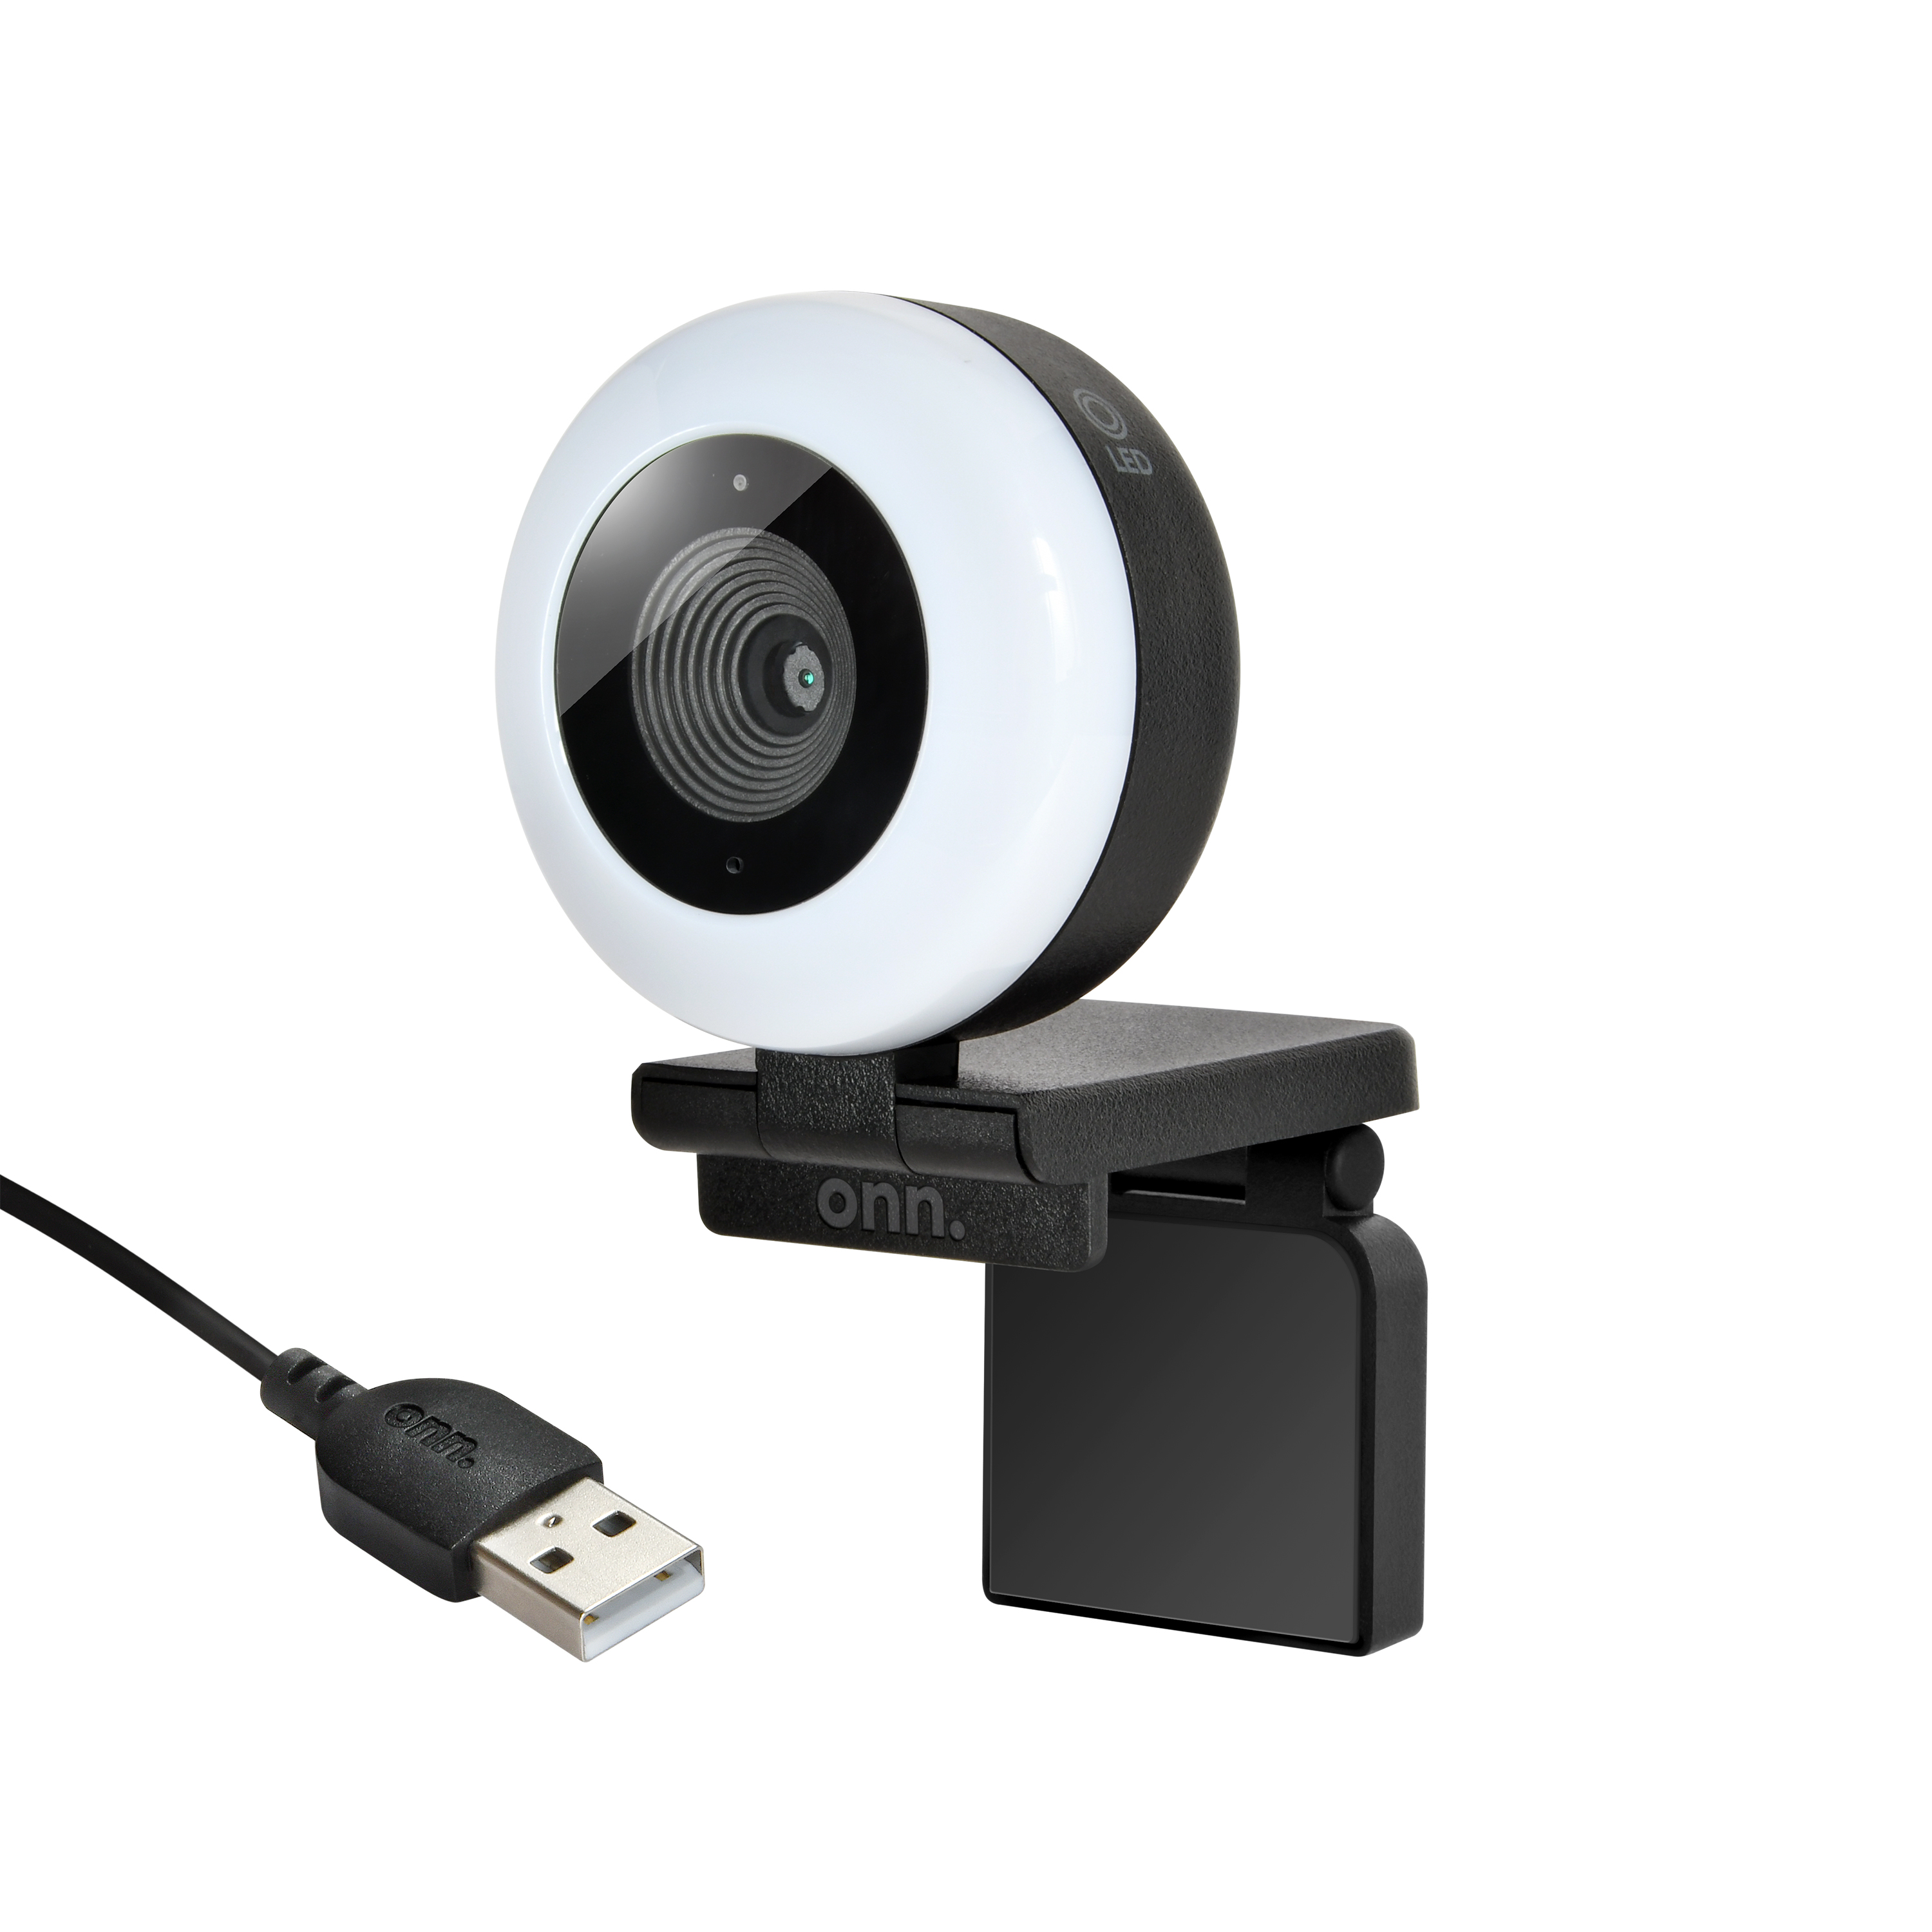 onn. Webcam with Ring Light w/3 LED Levels, Autofocus, Built-in Microphone, White & Black - image 5 of 7